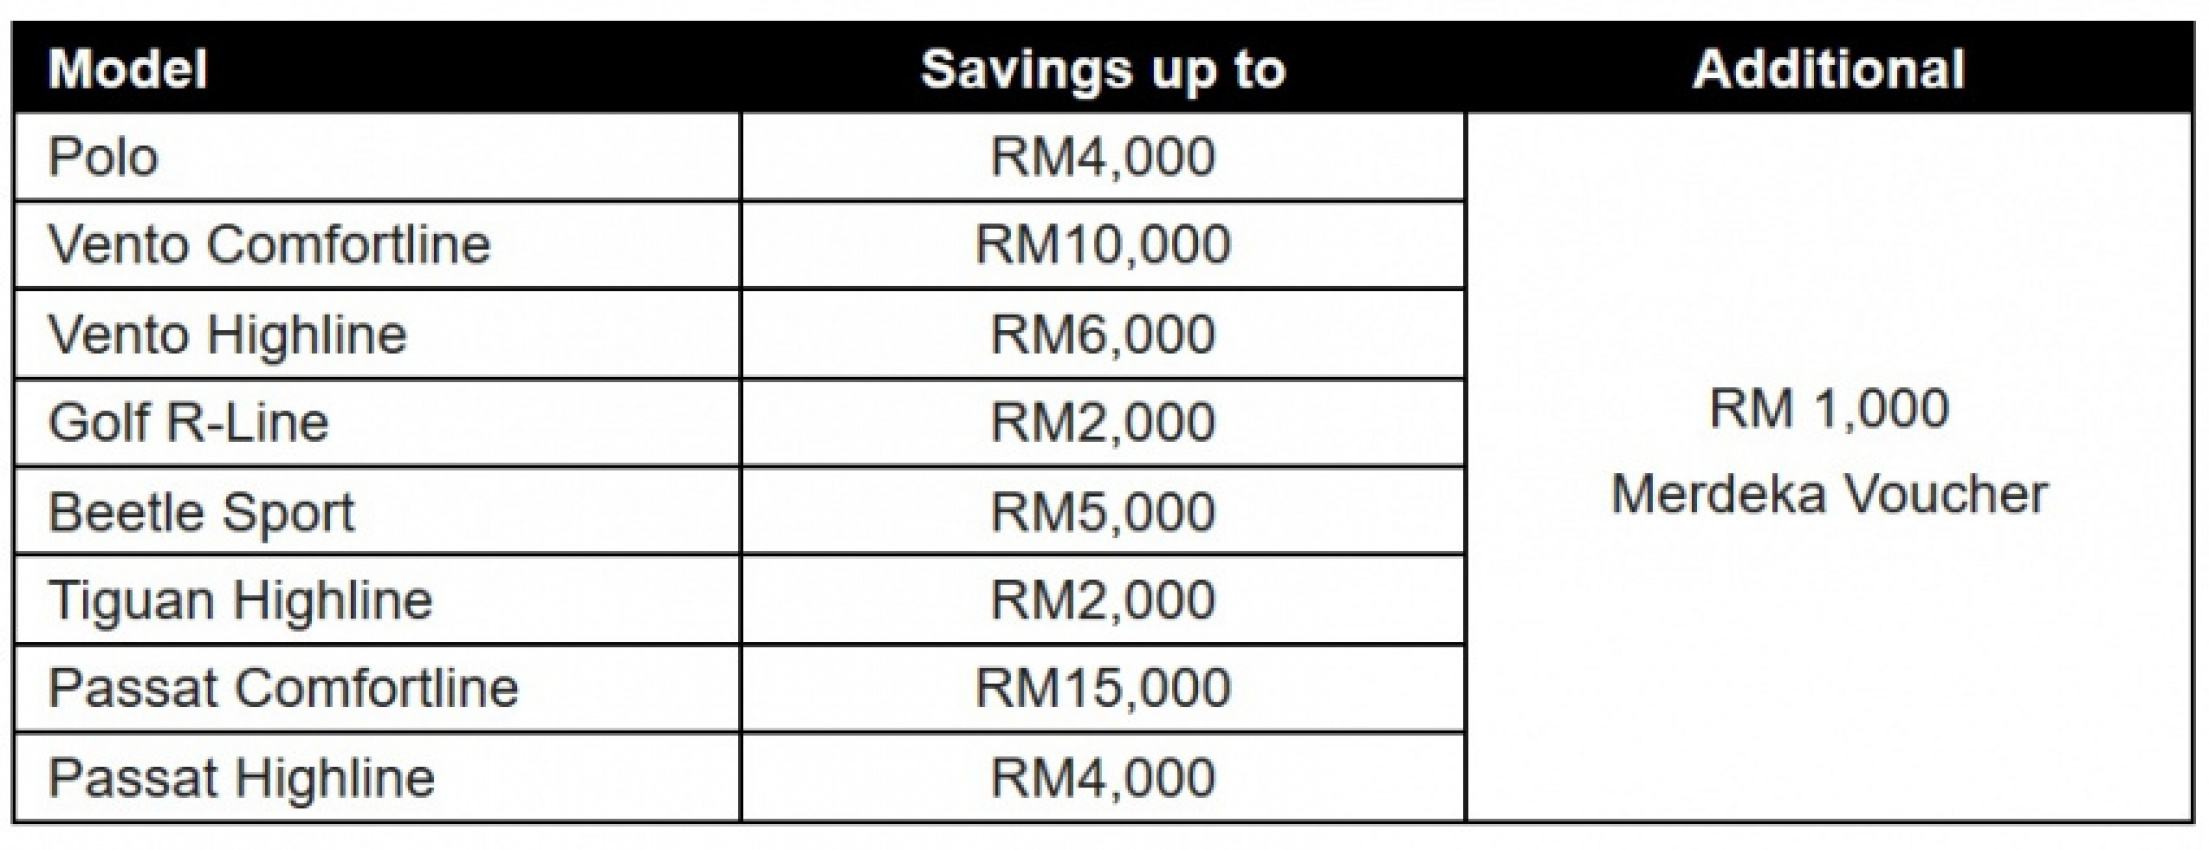 autos, car brands, cars, volkswagen, aftersales, automotive, battery, cars, crossover, hatchback, malaysia, promotions, sedan, shock absorbers, tyres, volkswagen passenger cars malaysia, volkswagen offers merdeka vouchers worth rm1,000 on top of ongoing promotions